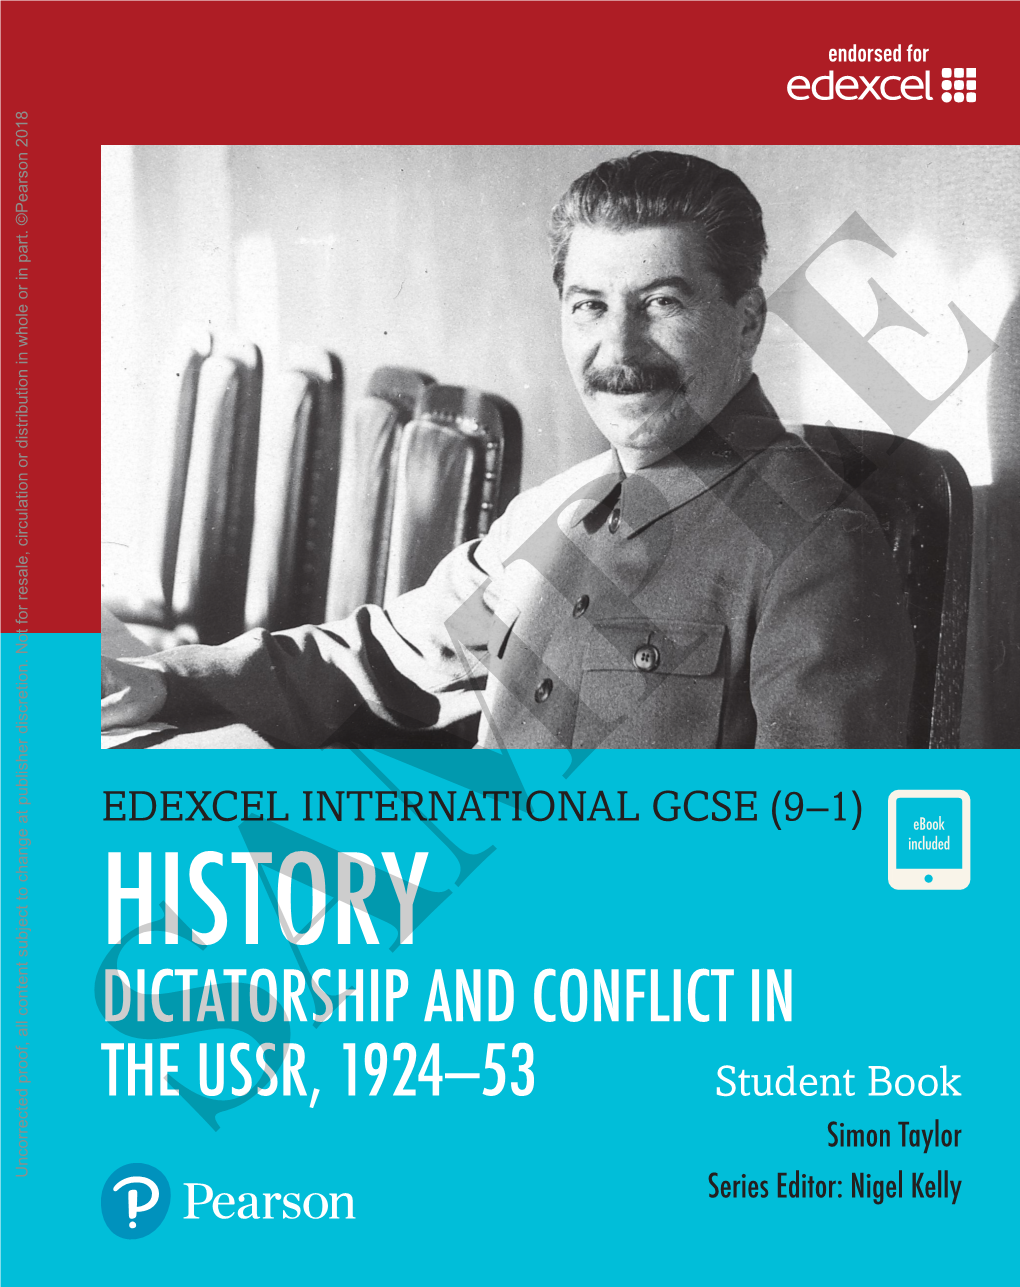 IN DICTATORSHIP and CONFLICT in the USSR, 1924–53 Student Book